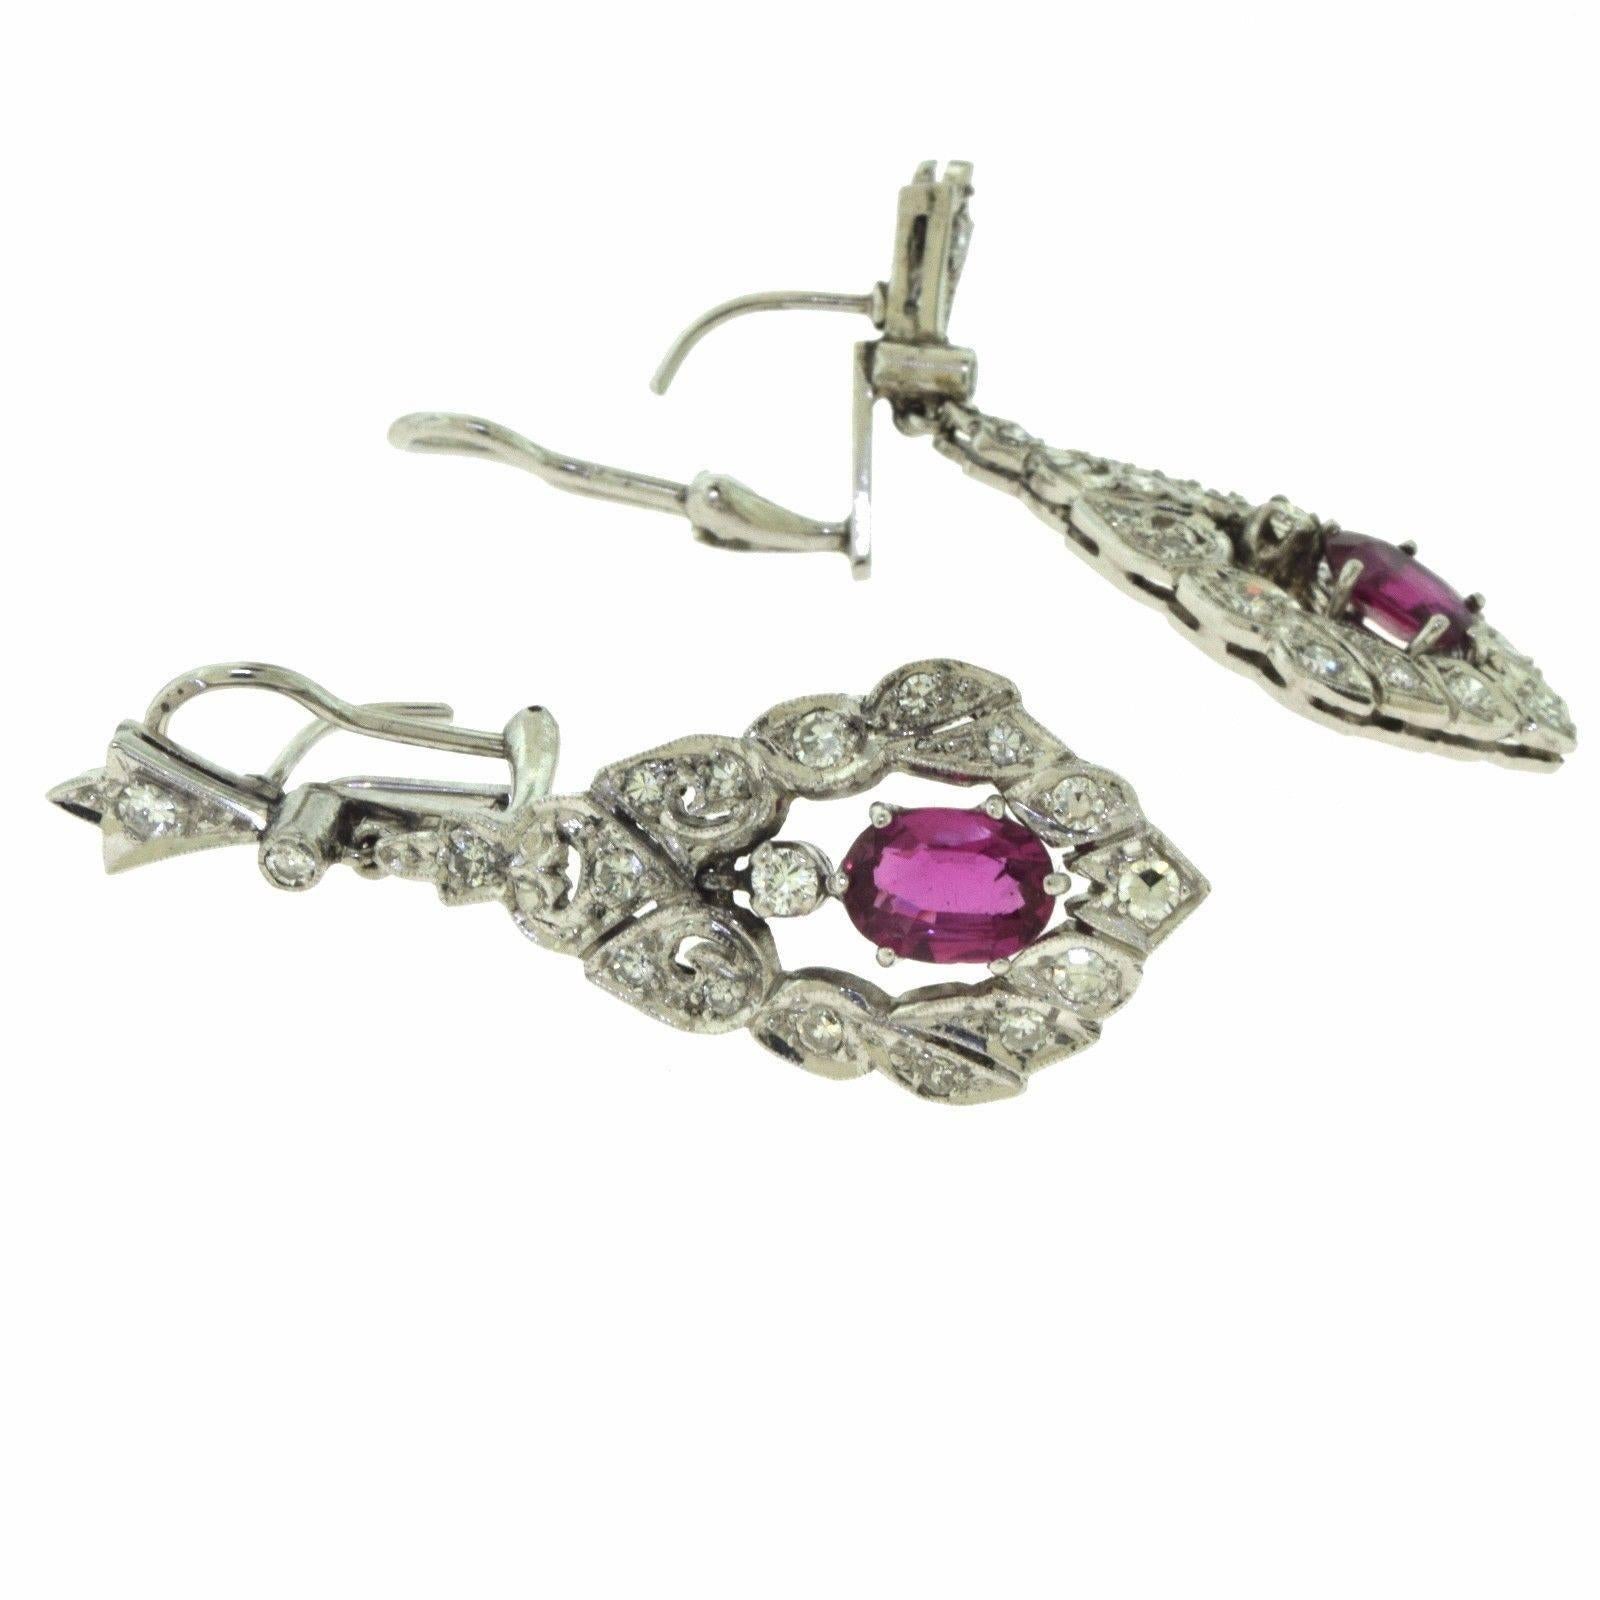 This is a magnificent pair of art deco earrings adorned with magnificent round diamonds and 2 gorgeous rubies (one on each earring) and is the result of a beautifully intricate work of art with a precious story to tell the world. This makes a